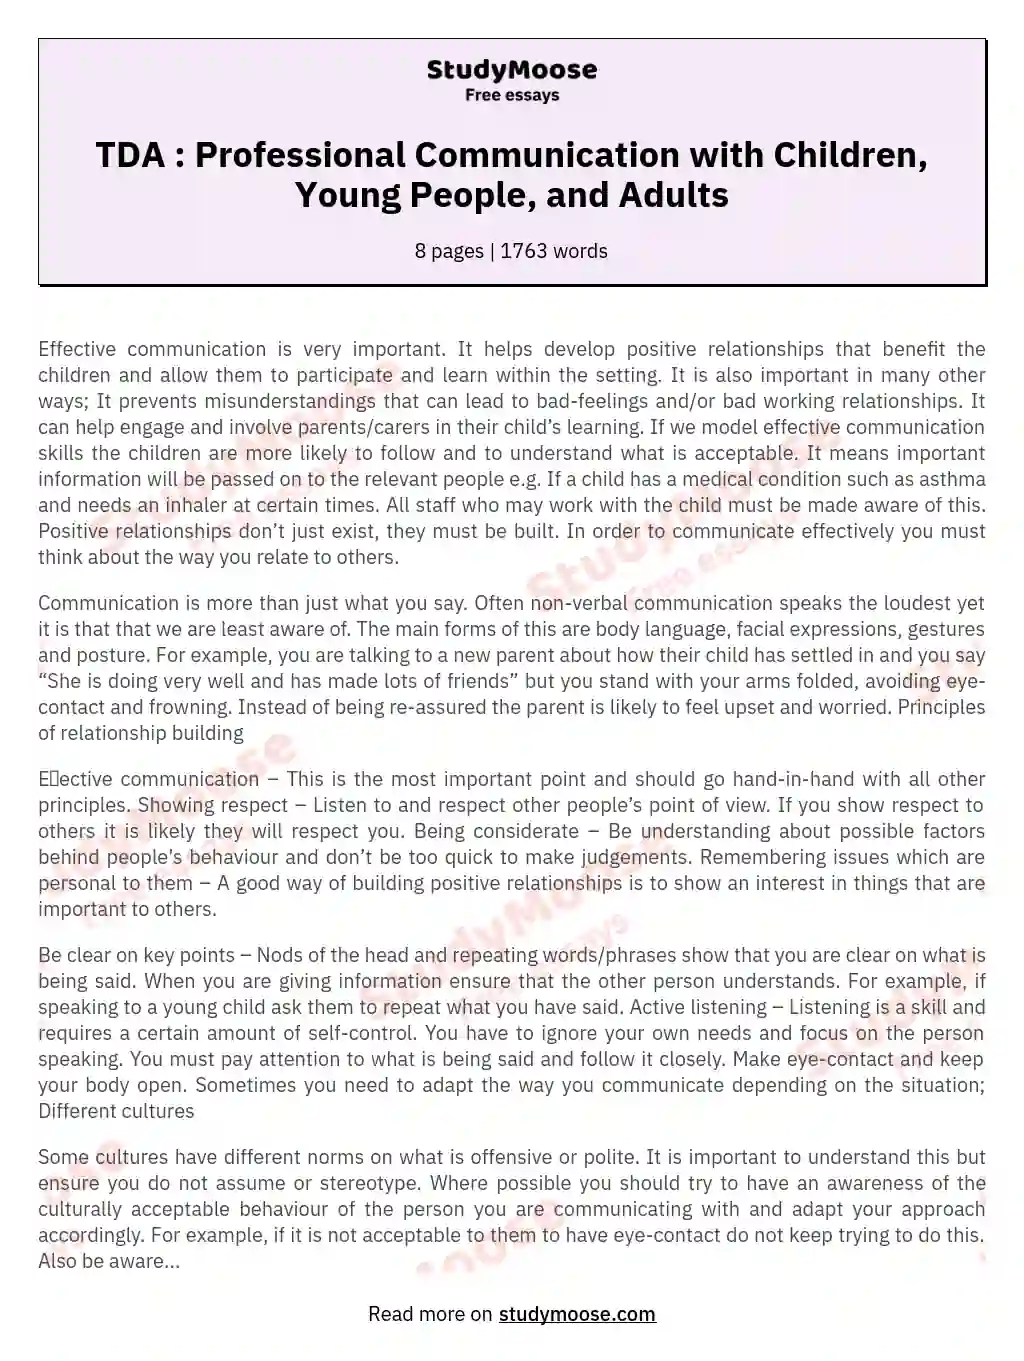 TDA : Professional Communication with Children, Young People, and Adults essay